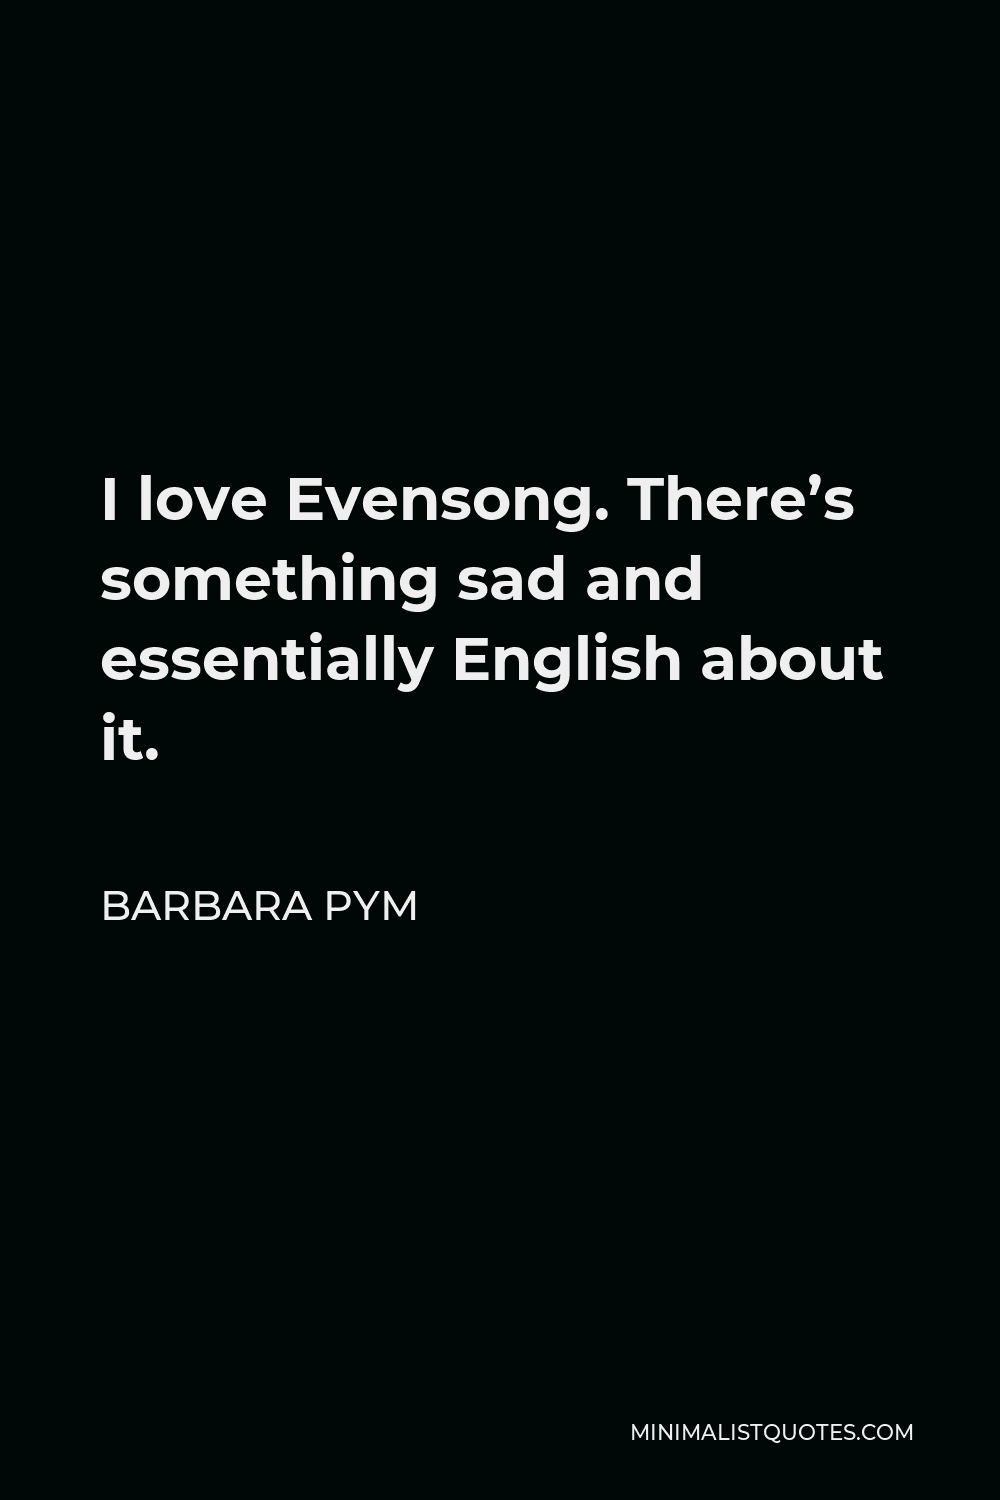 Barbara Pym Quote - I love Evensong. There’s something sad and essentially English about it.